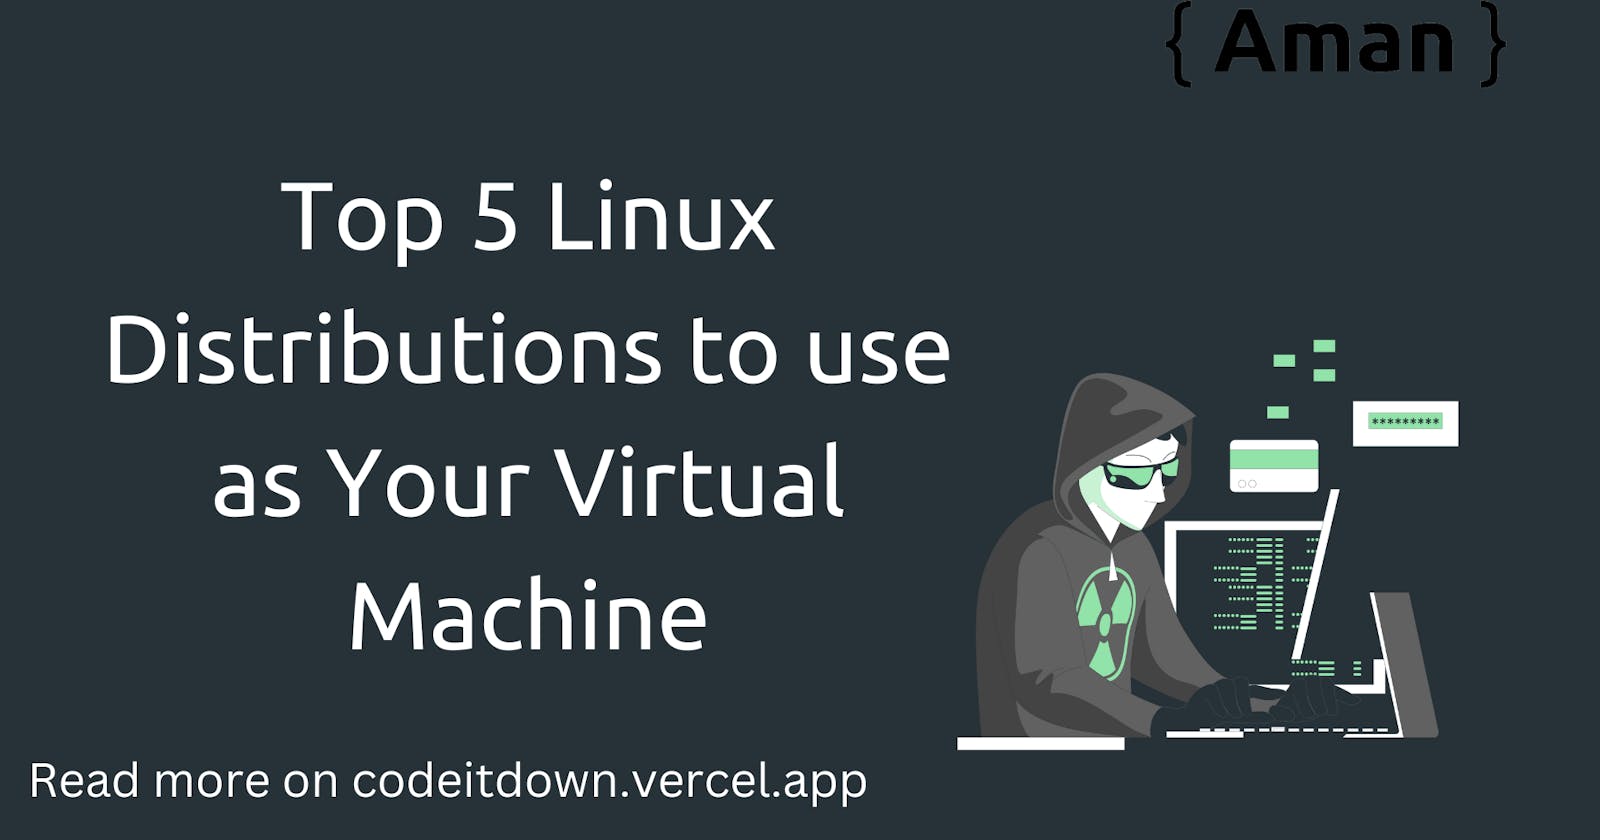 Top 5 Linux Distributions to use as Your Virtual Machine